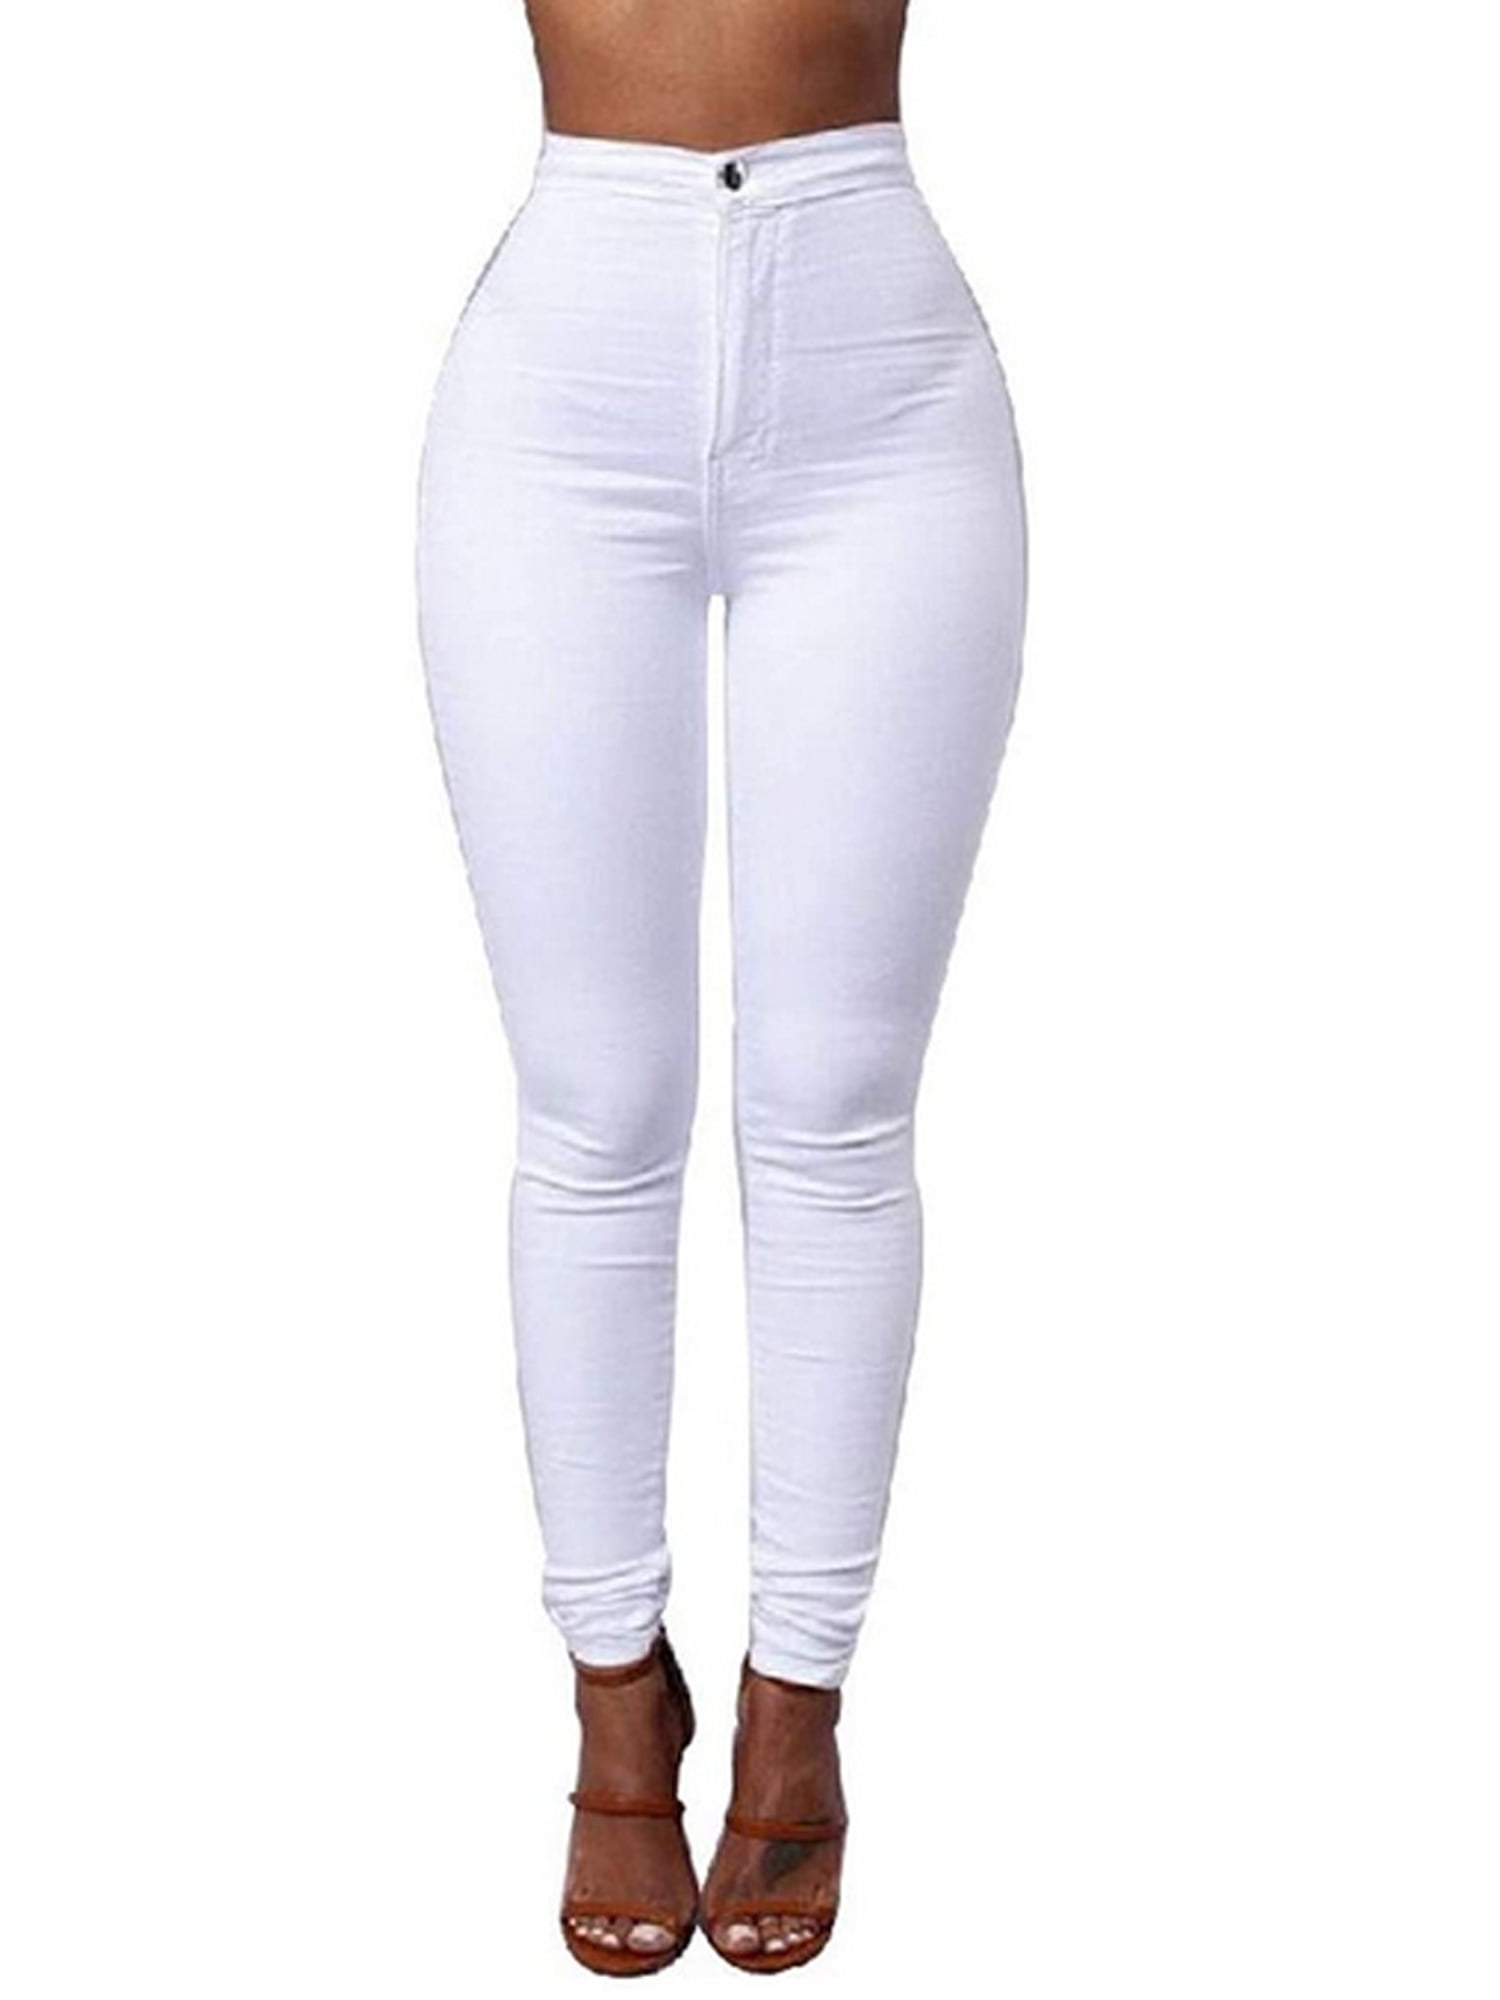 Woman Pencil Stretch Casual Look Denim Skinny Jeans Pants High Waist Trousers 